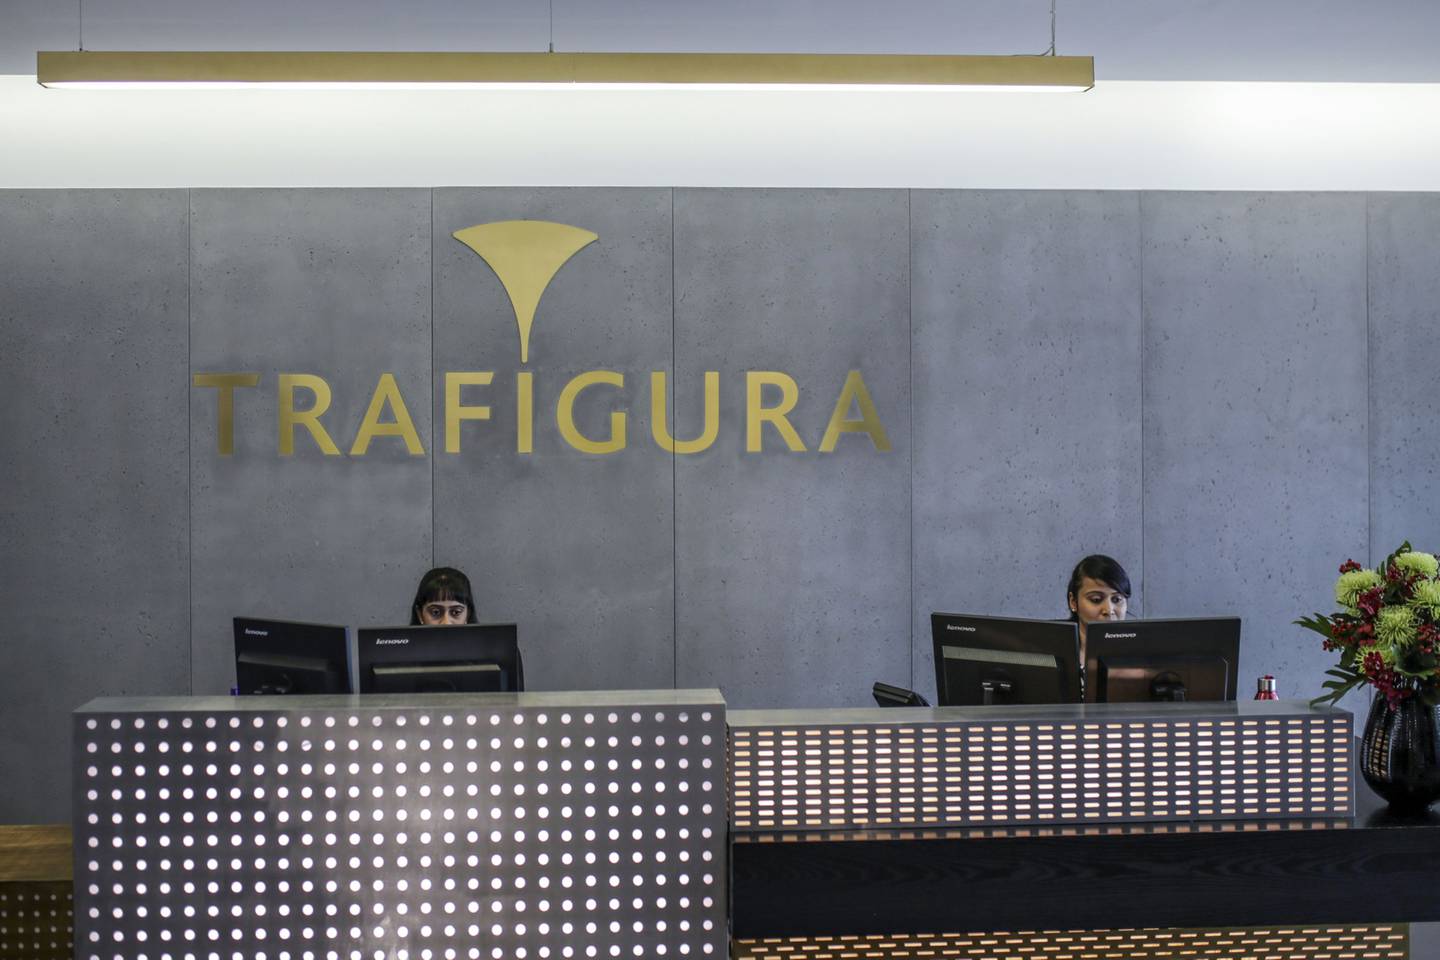 In June Trafigura signed a contract to supply diesel oil, the type used for power generation, to Petroecuador.